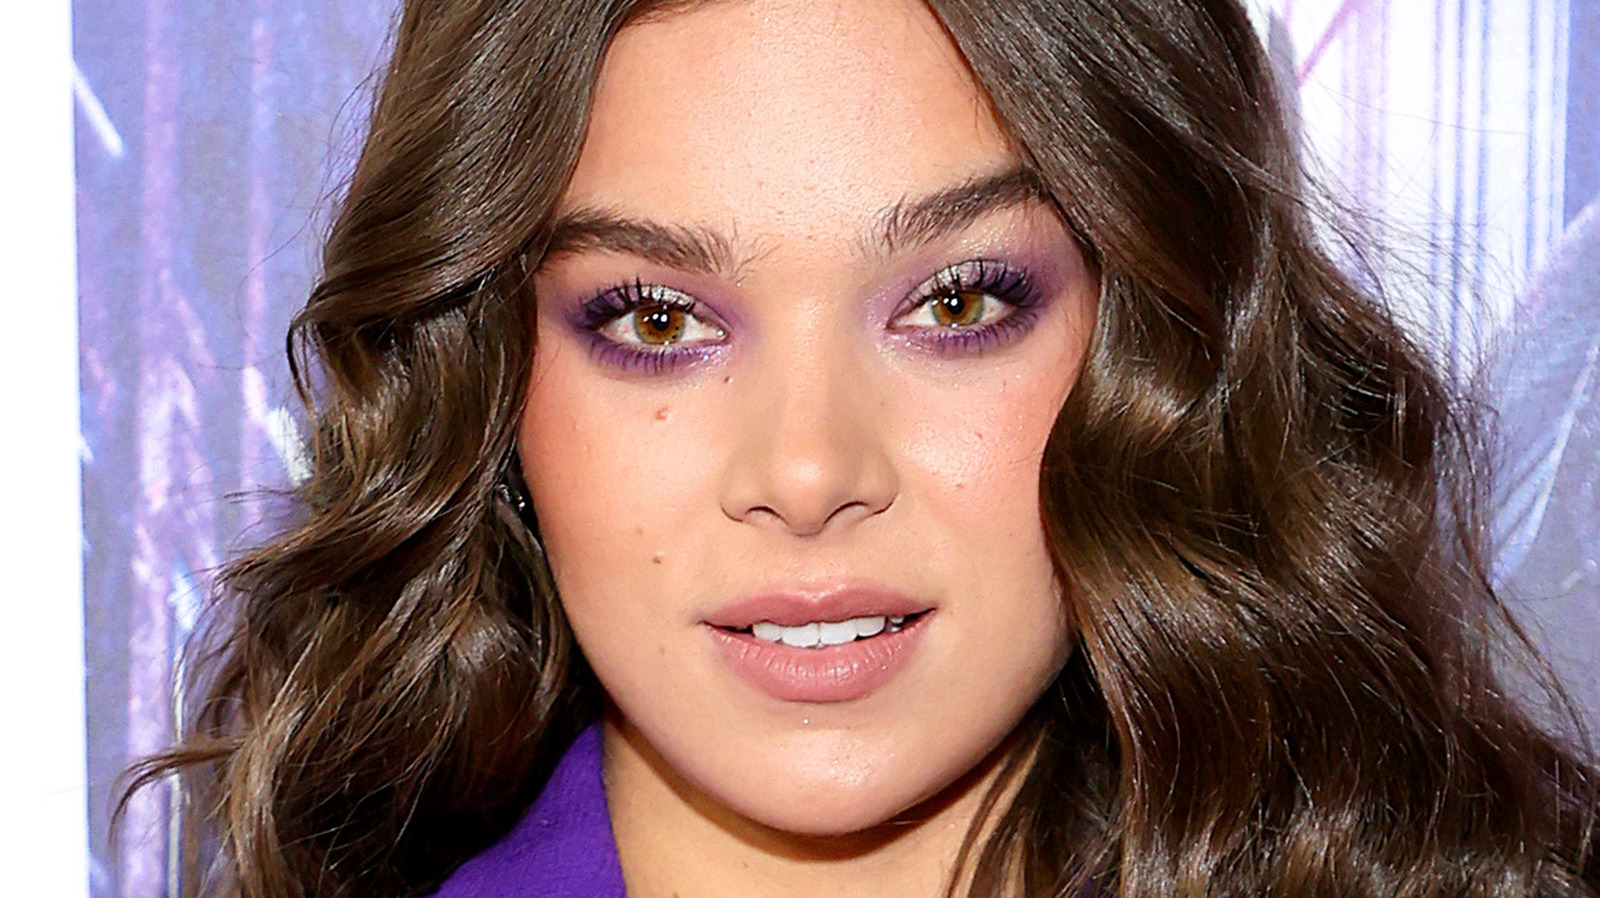 Things You Didn't Know About Hailee Steinfeld